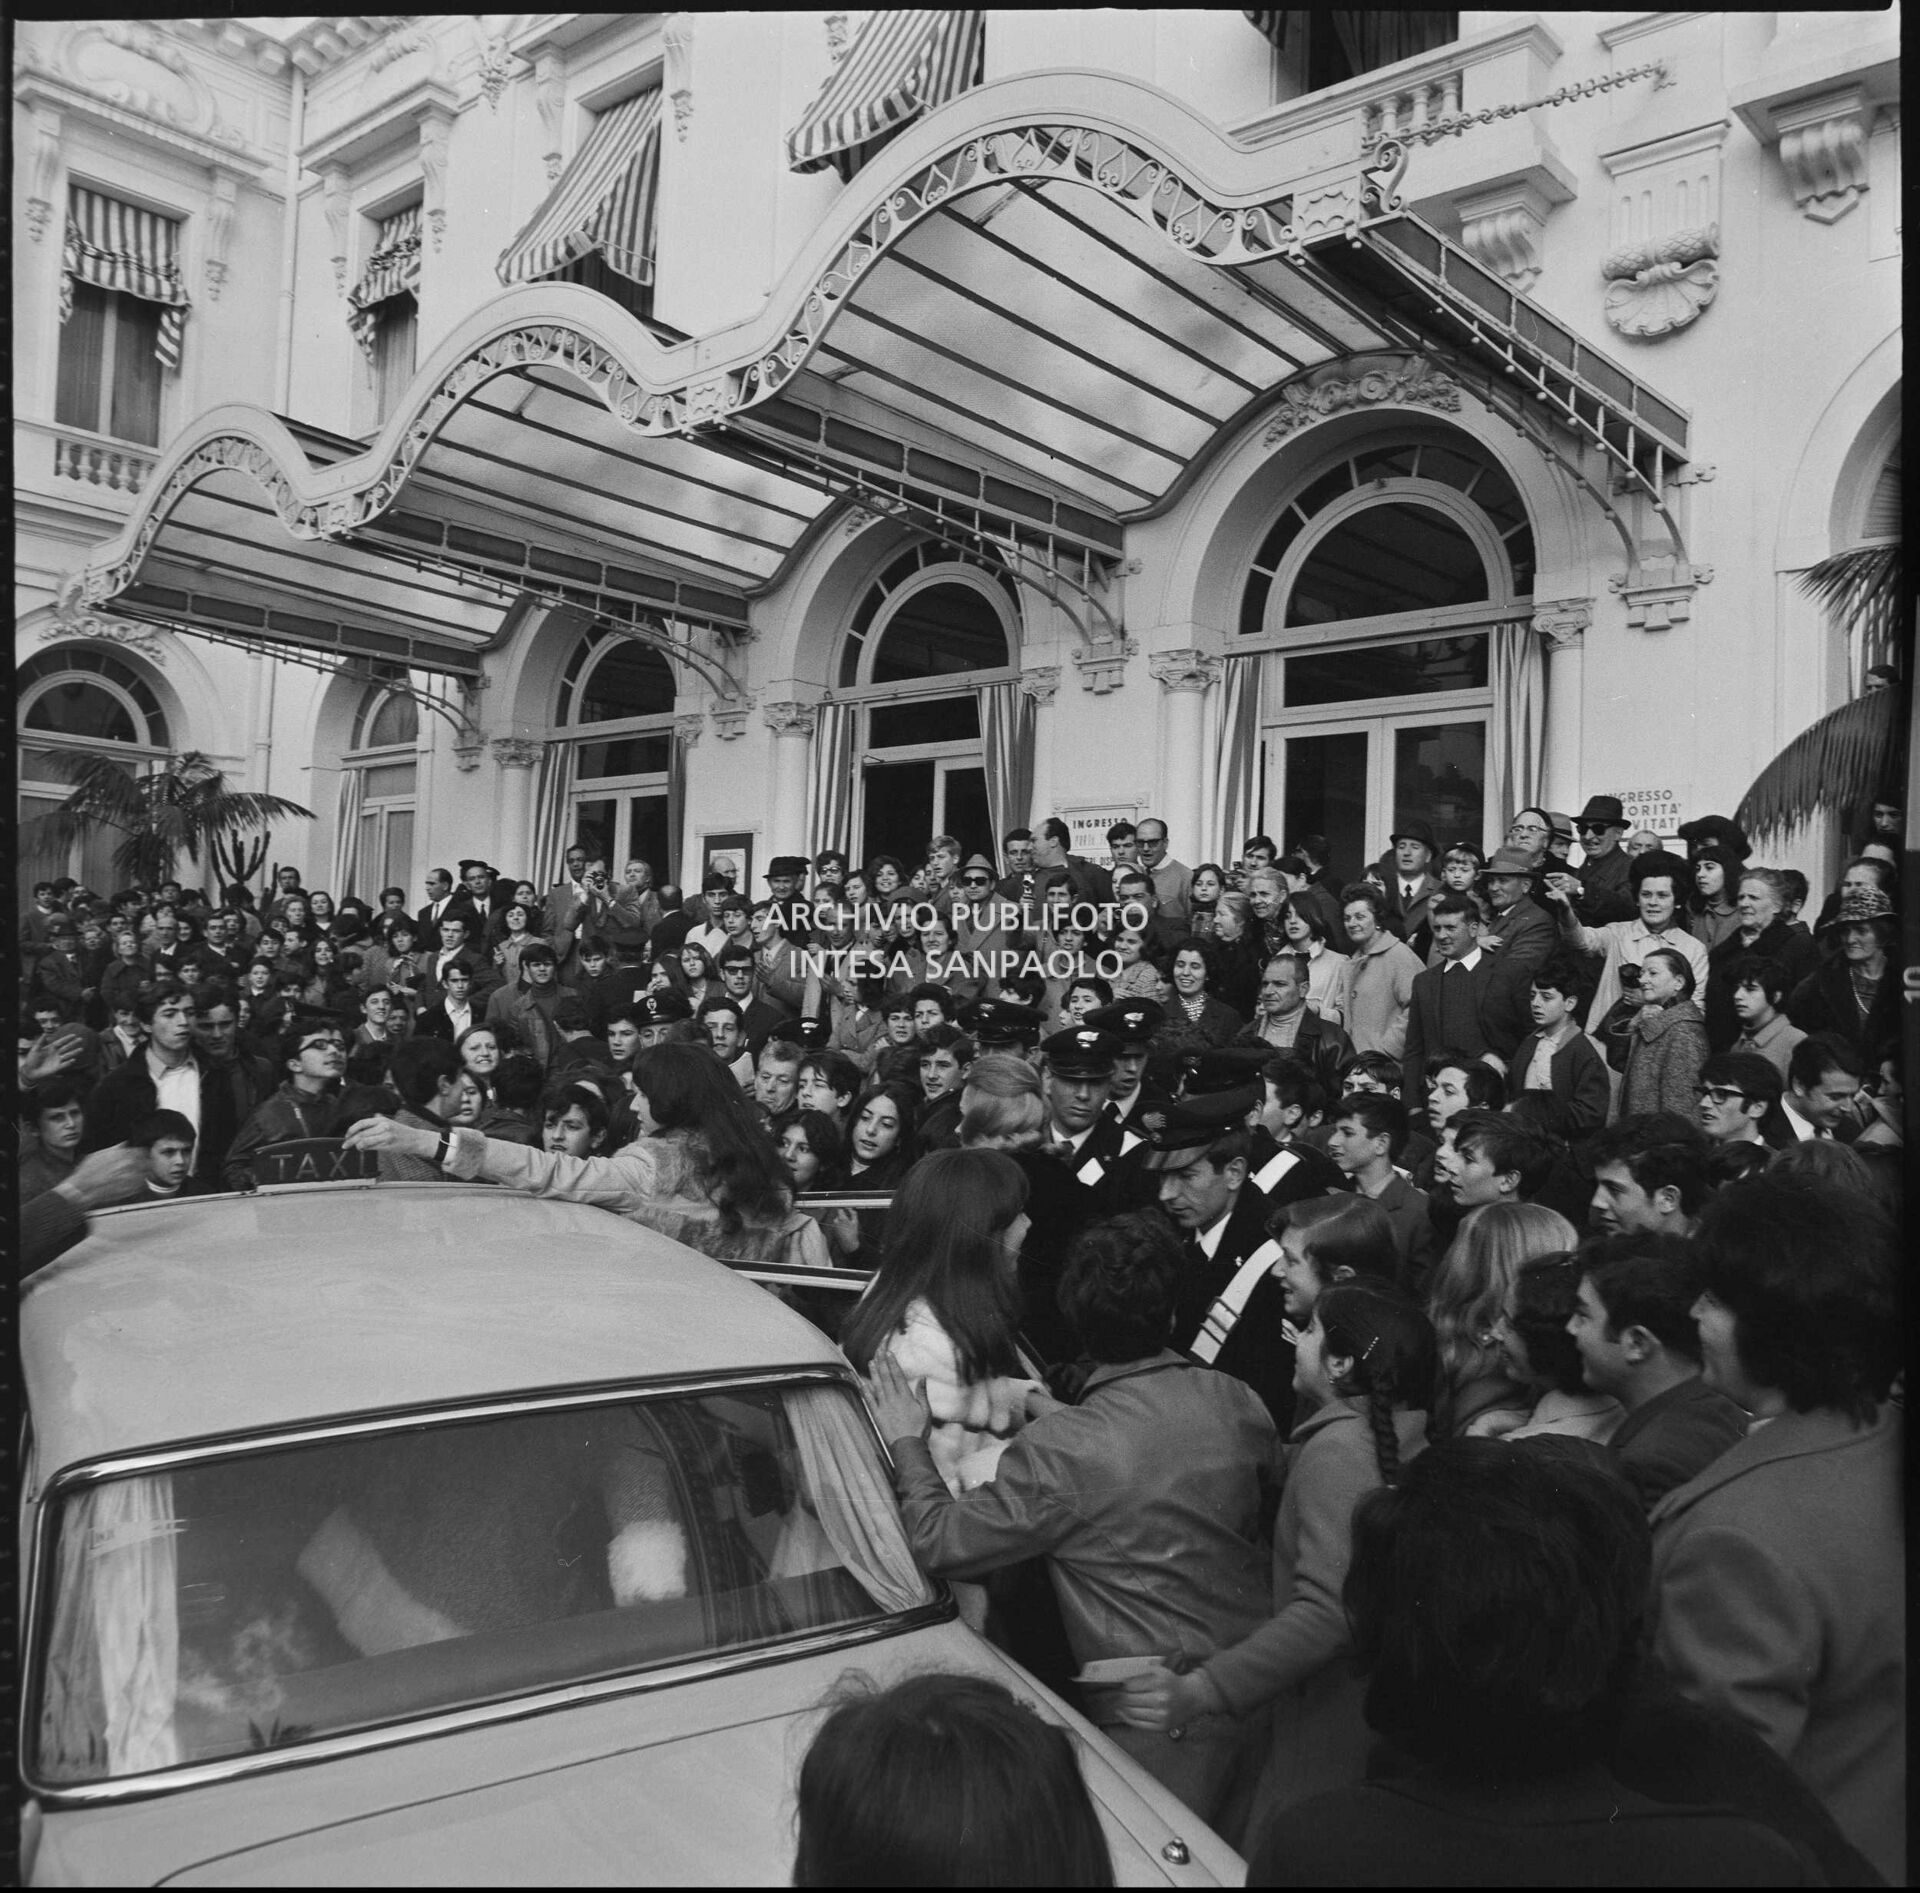 The crowd outside the Casino during the 19th Sanremo Festival waiting for the singers to arrive